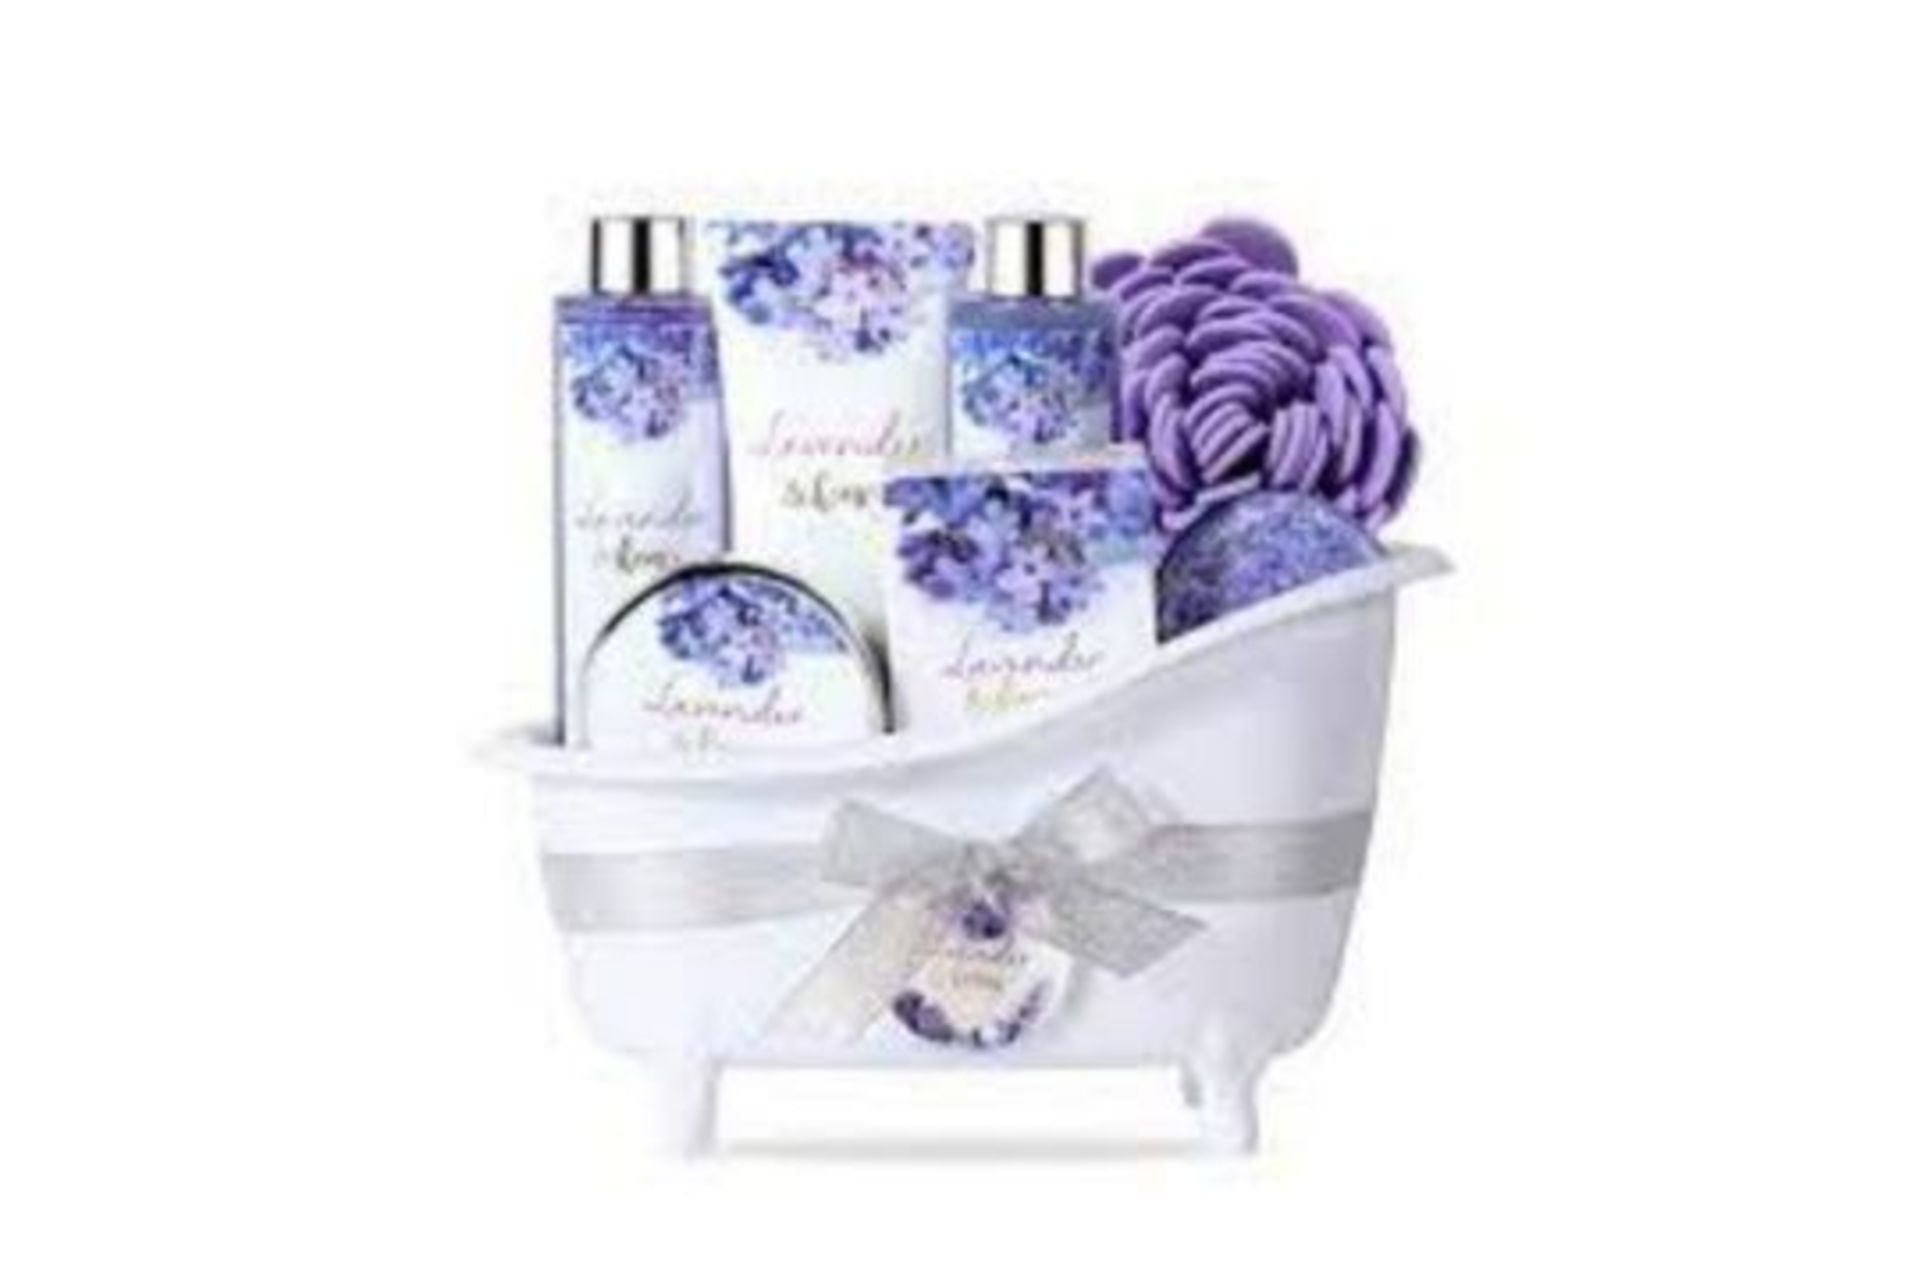 PALLET TO CONTAIN 48 X NEW PACKAGED BODY & EARTH Lavender & Honey Spa Bathtub Set. (AMABE-3-1)